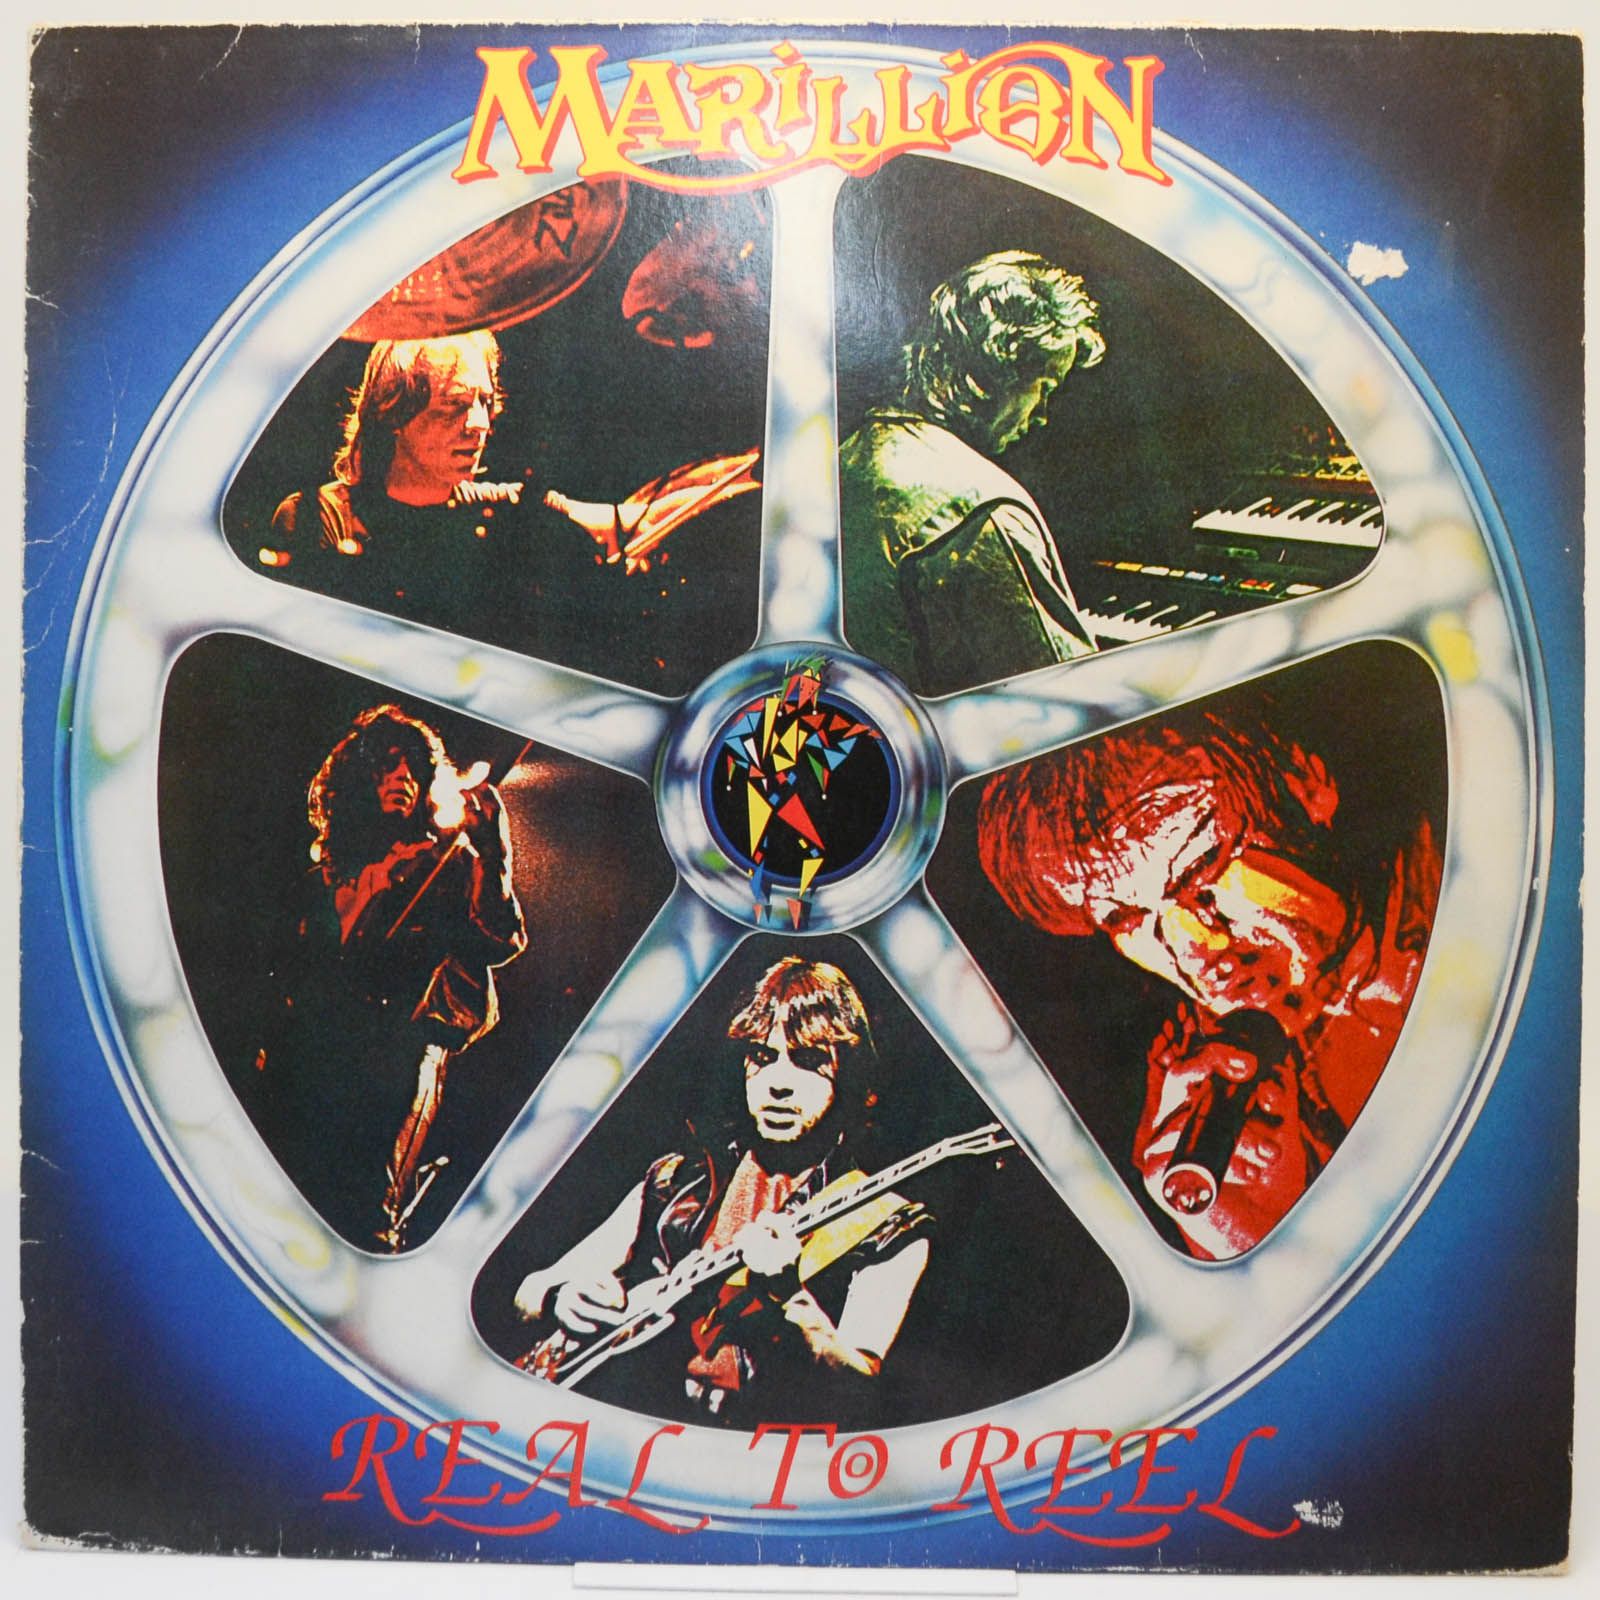 Marillion — Real To Reel, 1984